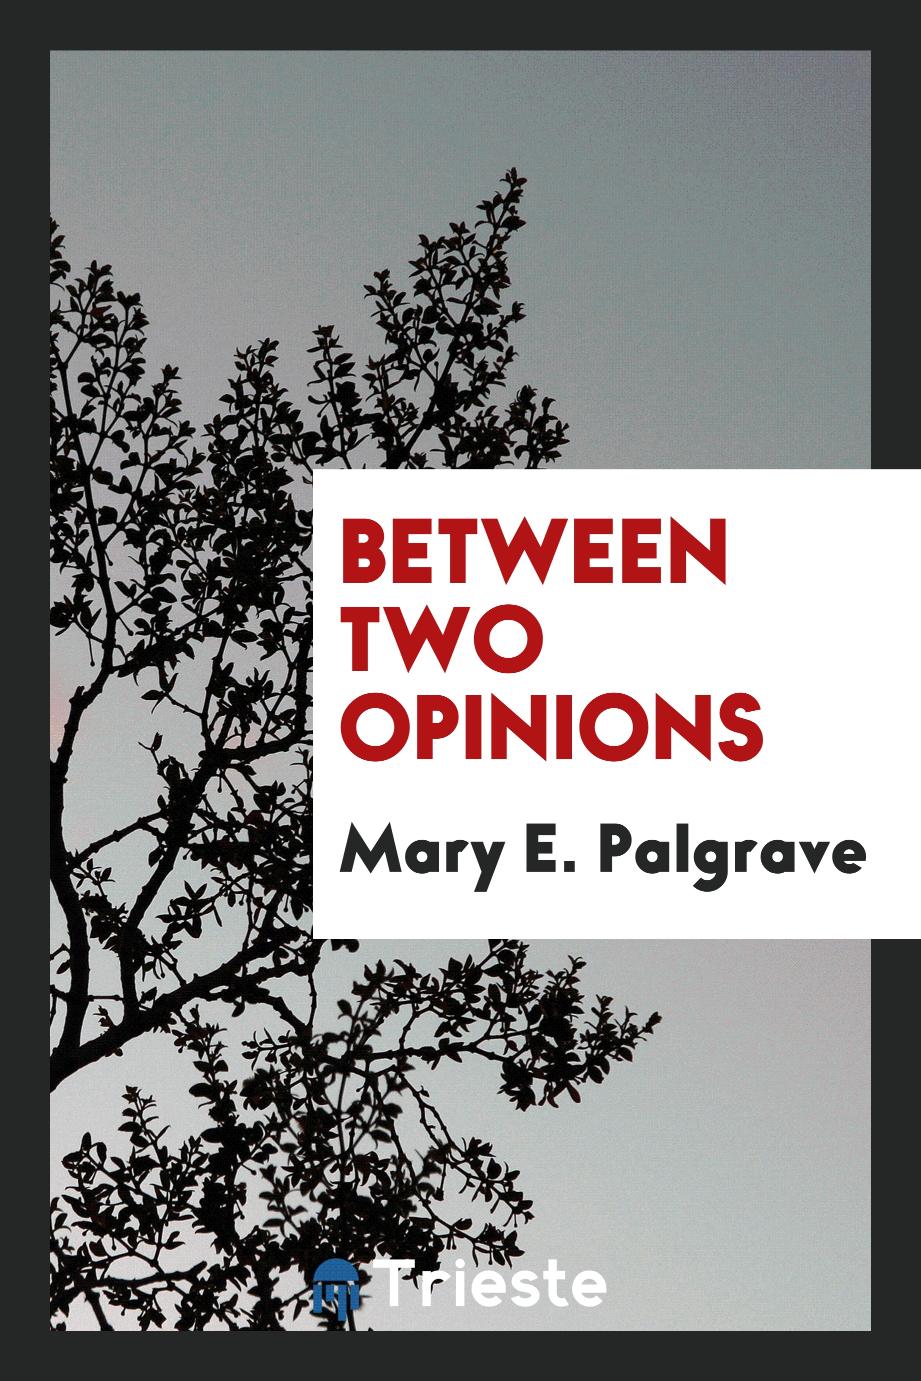 Between two opinions